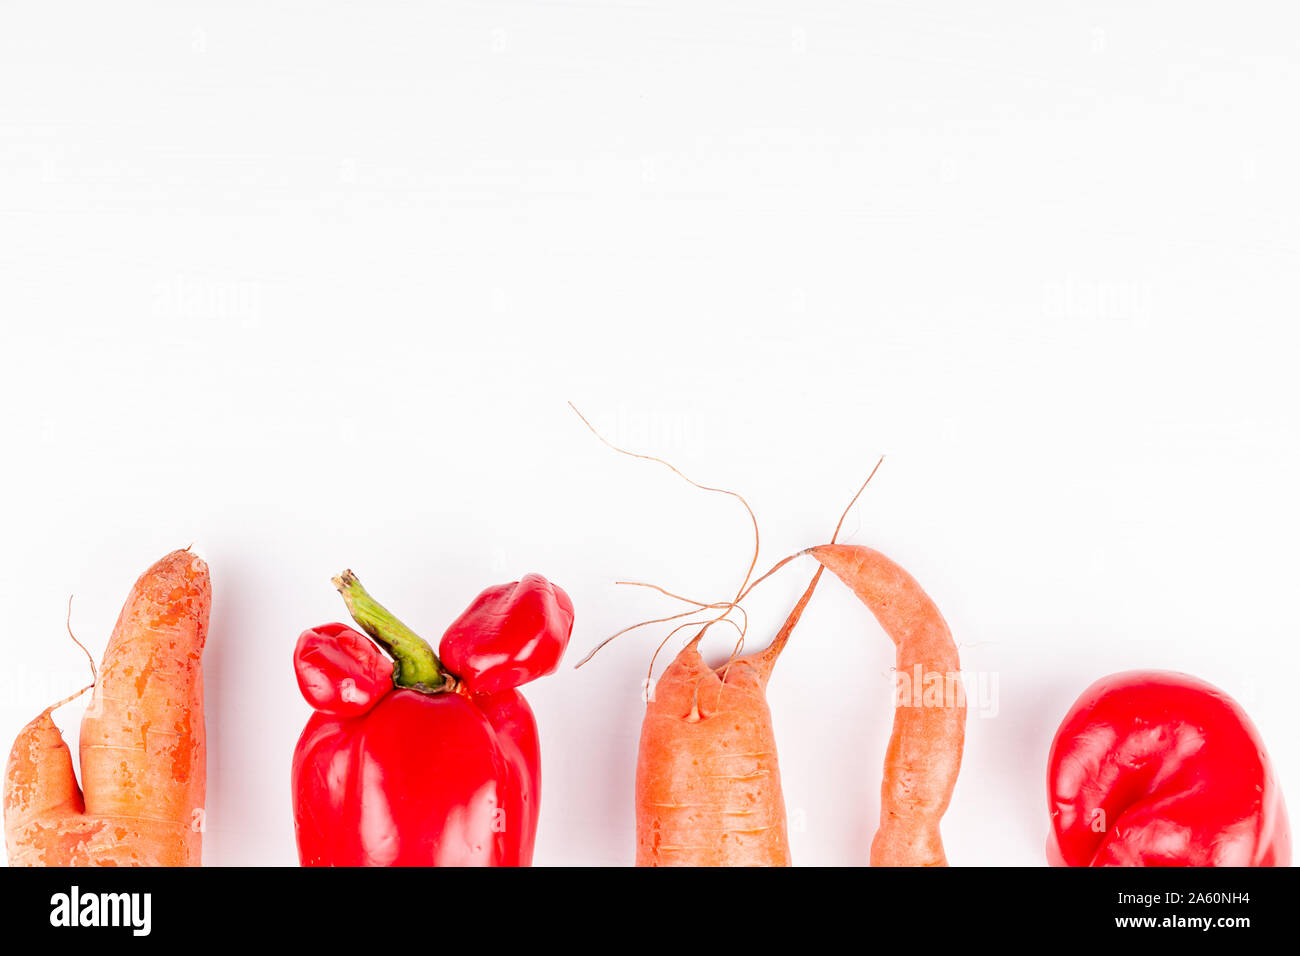 Trendy ugly vegetables with mutations, concept of zero waste production in food Stock Photo